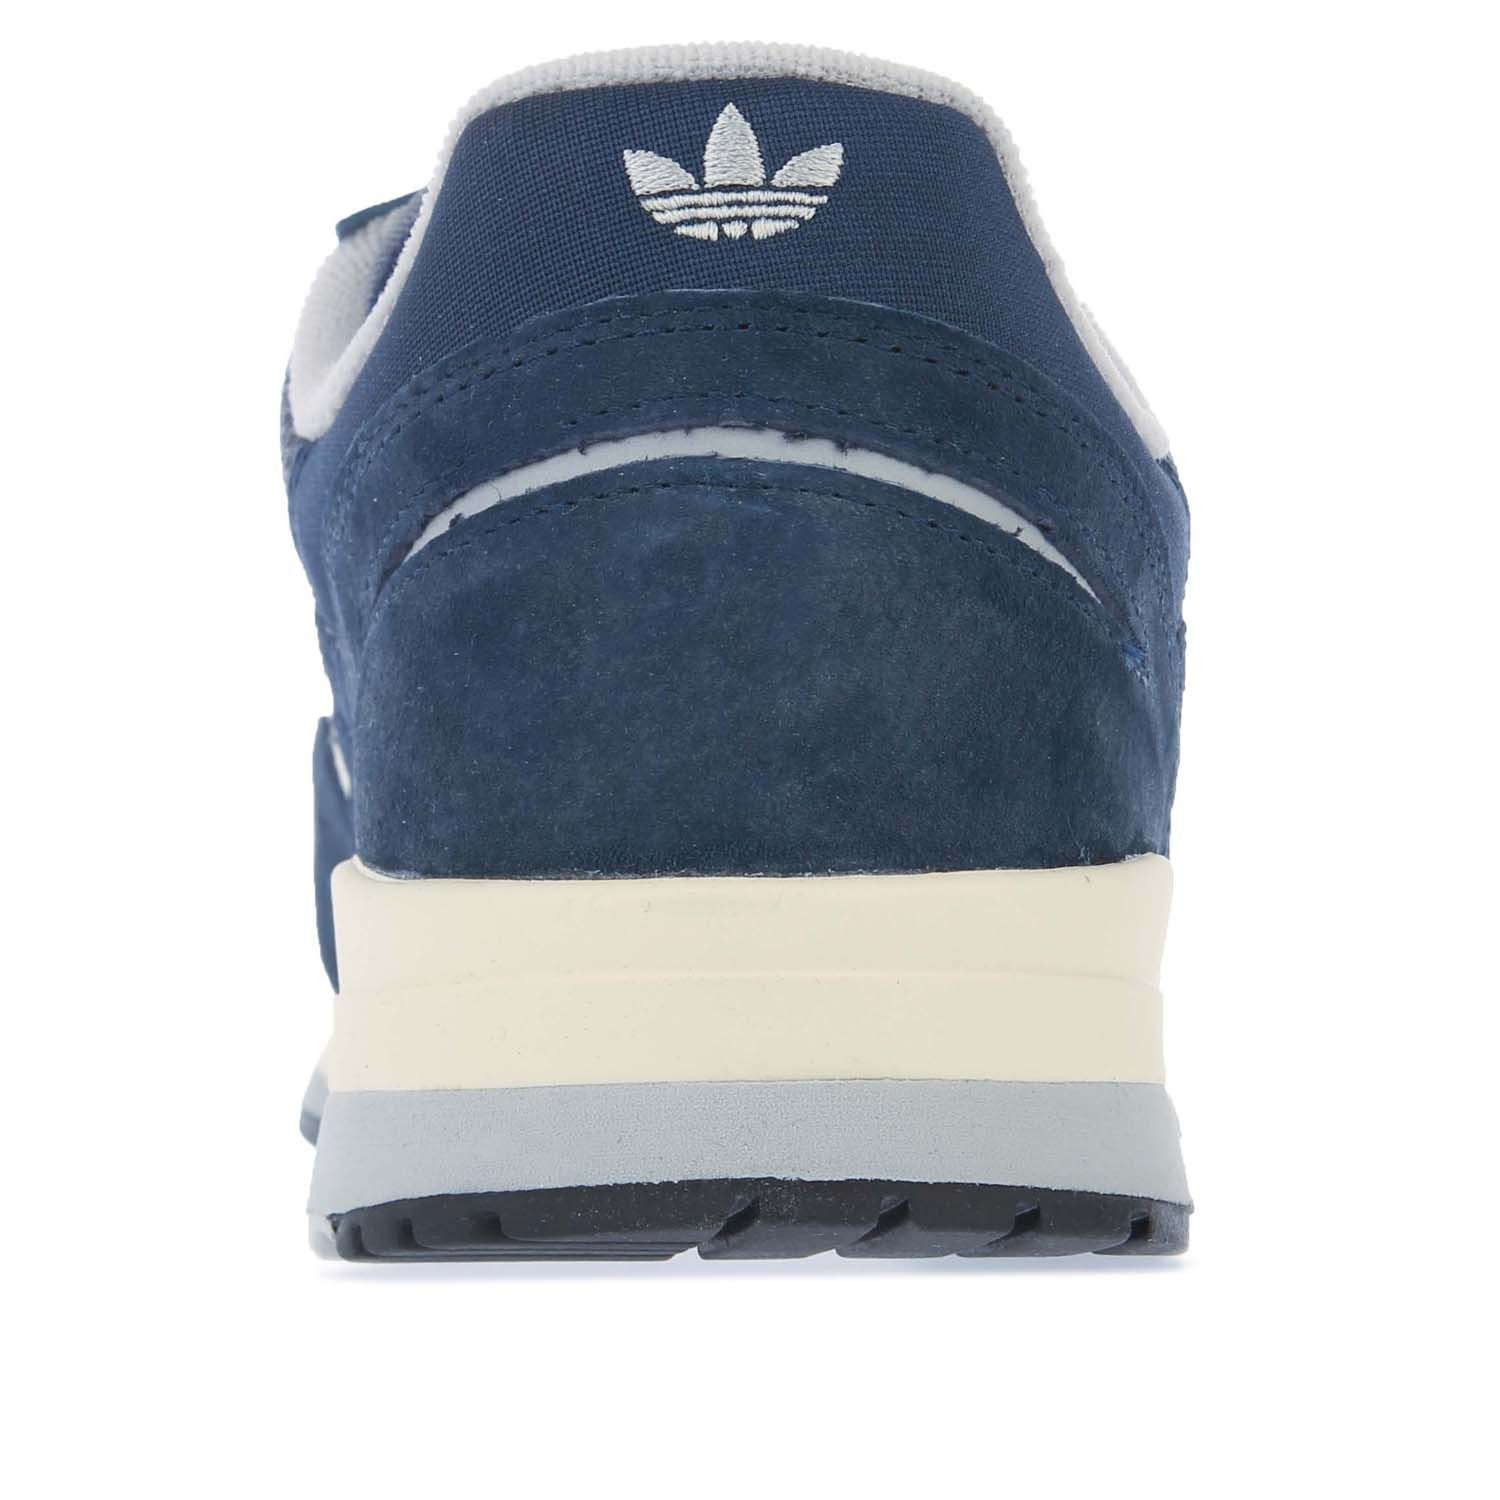 Mens adidas Originals ZX 420 Trainers in navy.- Suede and Mesh upper.- Lace closure.- Low-profile design. - Padded tongue and cuff. - Signature adidas branding.- adidas Trefoil logo on tongue and heel.- EVA midsole.- Rubber Outsole. - Leather upper  Leather lining  Synthetic sole.- Ref.: FZ0145